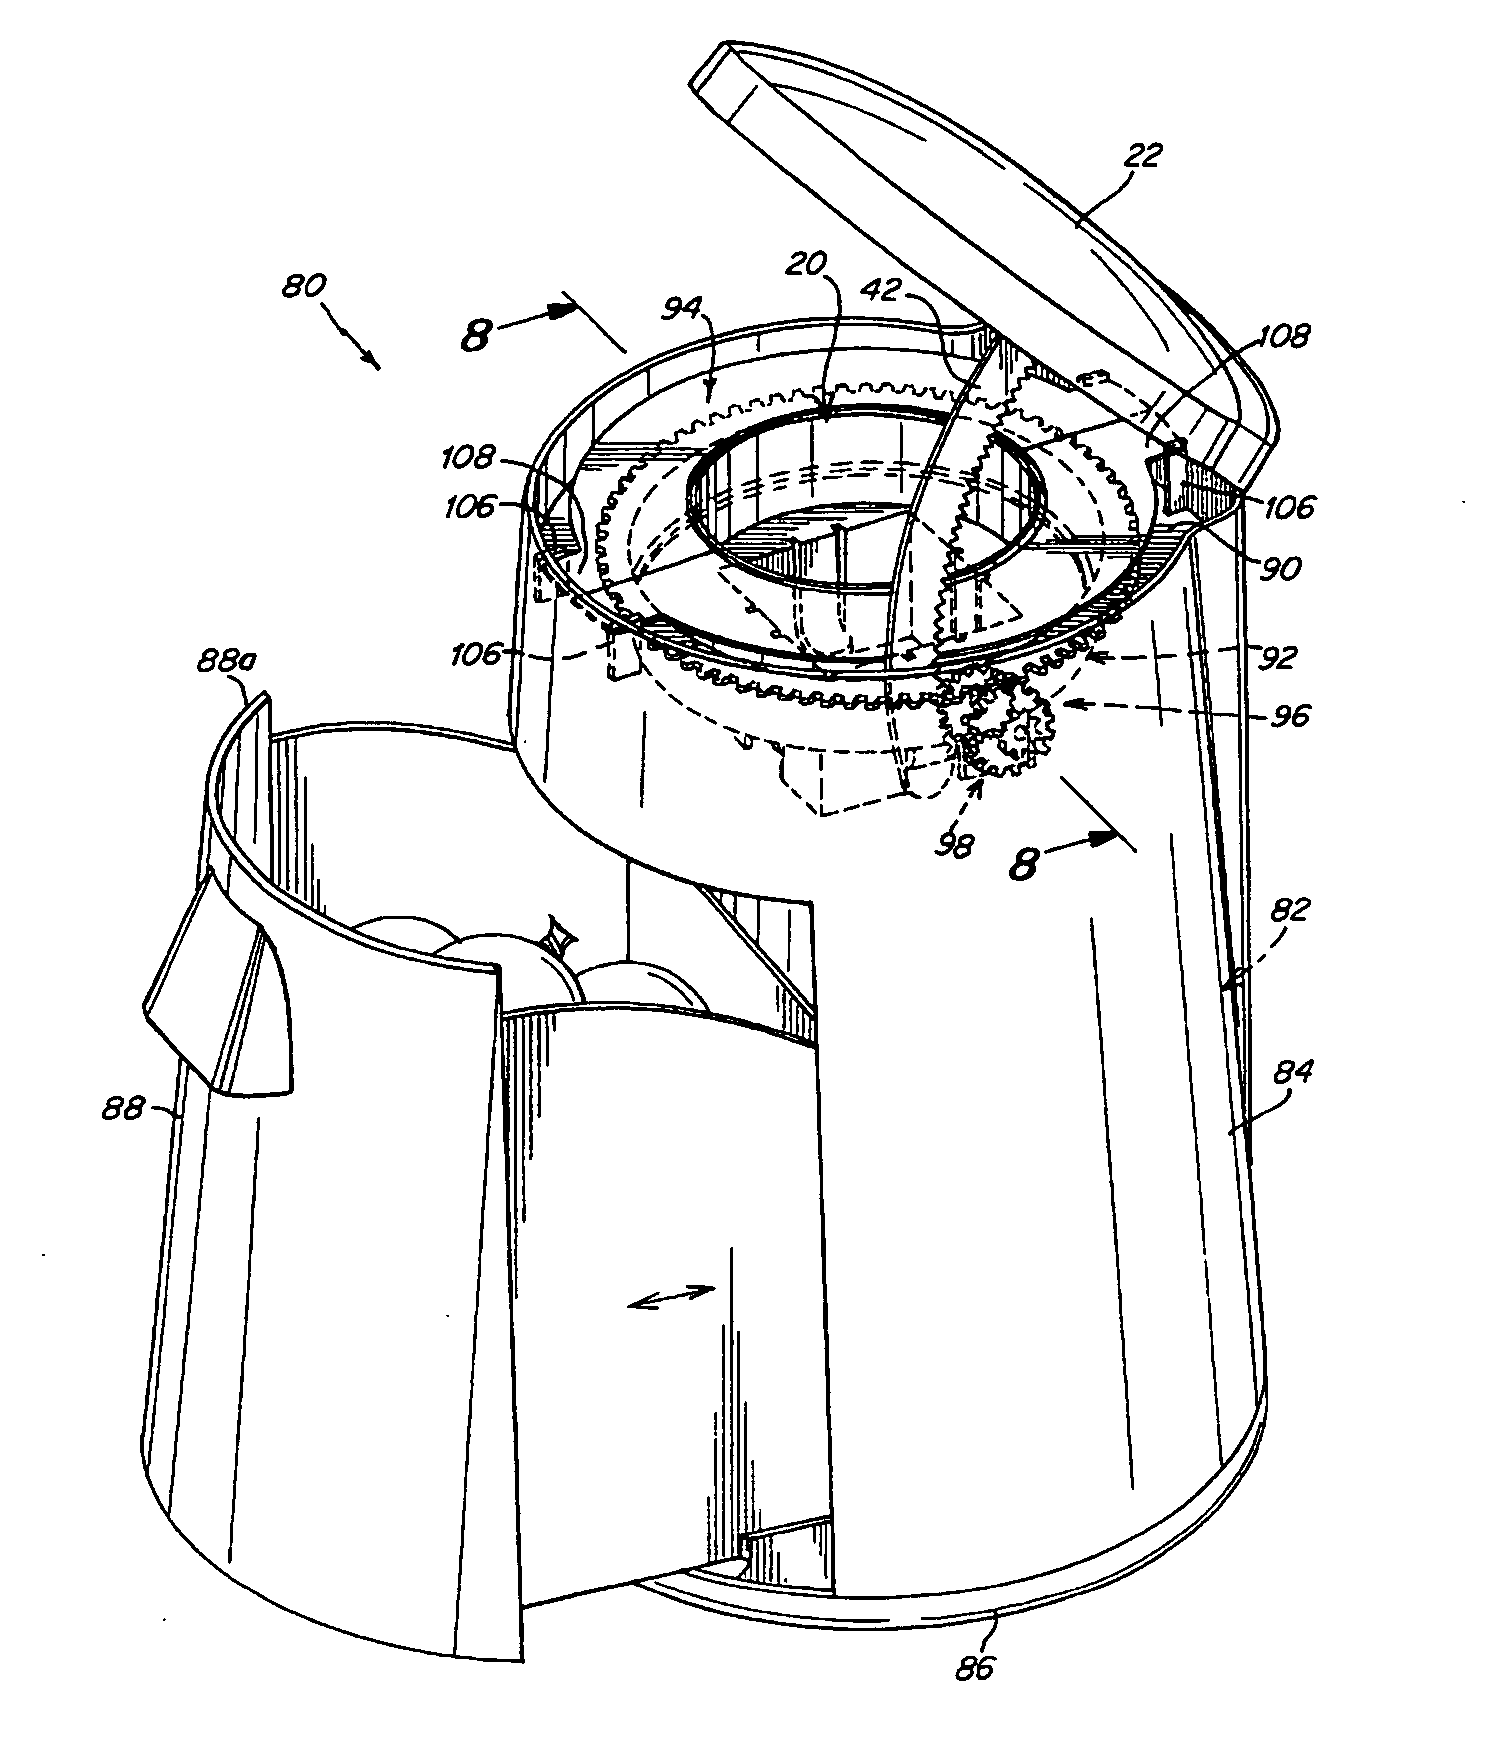 Waste disposal device including a hamper accessible through a movable door